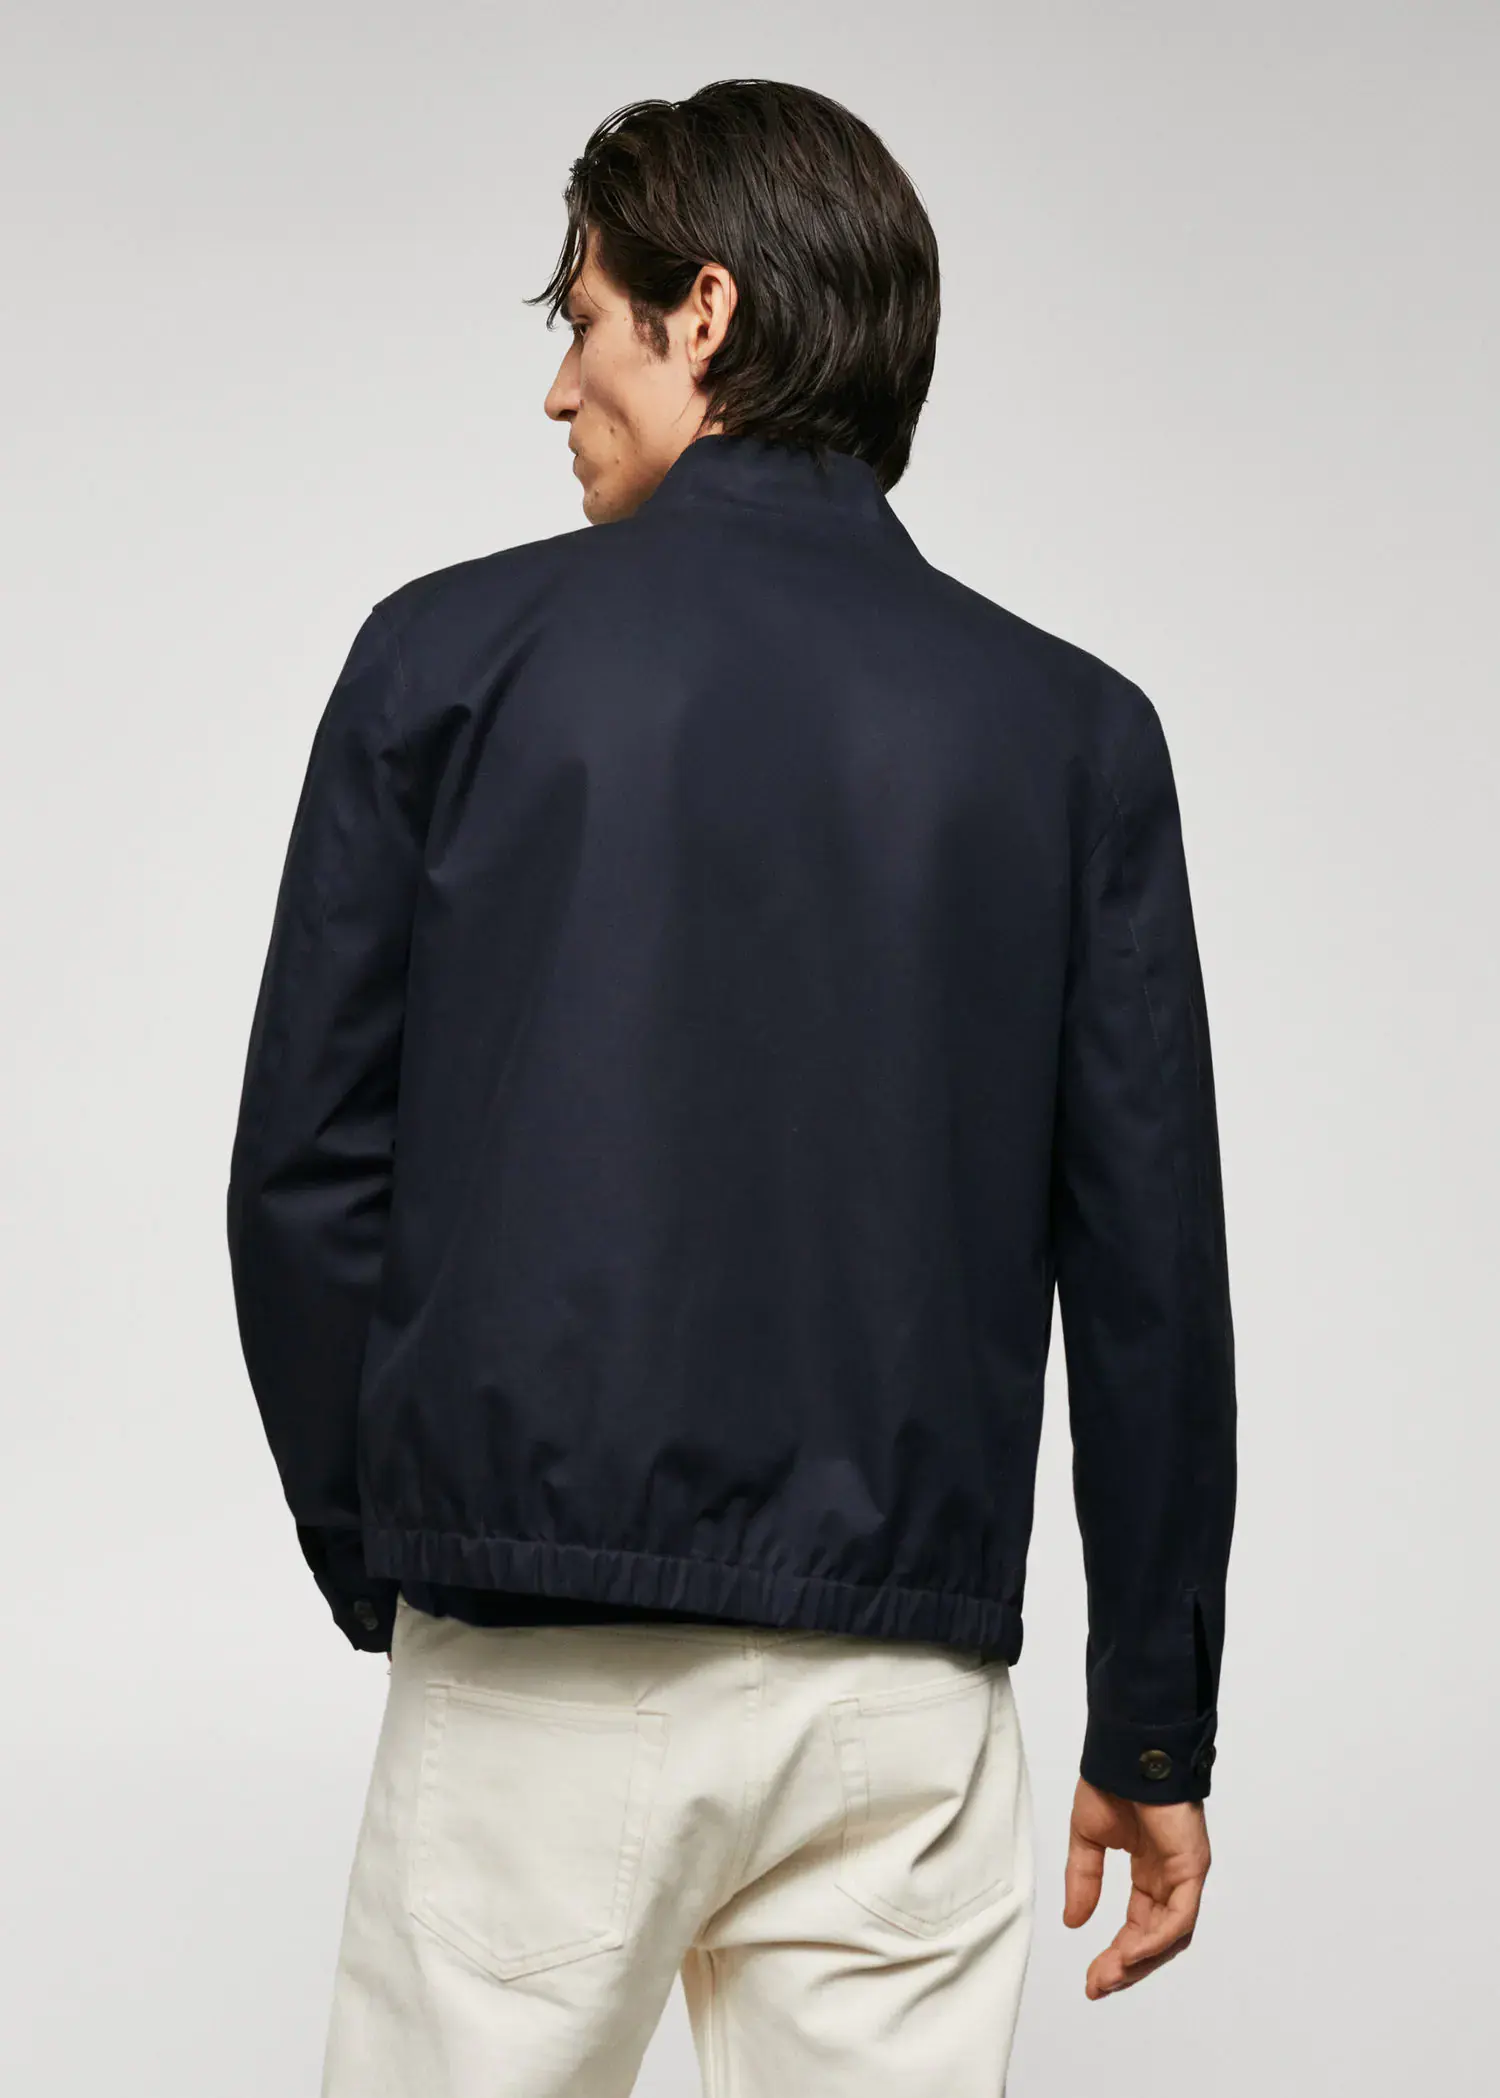 Mango 100% cotton bomber jacket. a man wearing a black jacket standing in front of a white wall. 